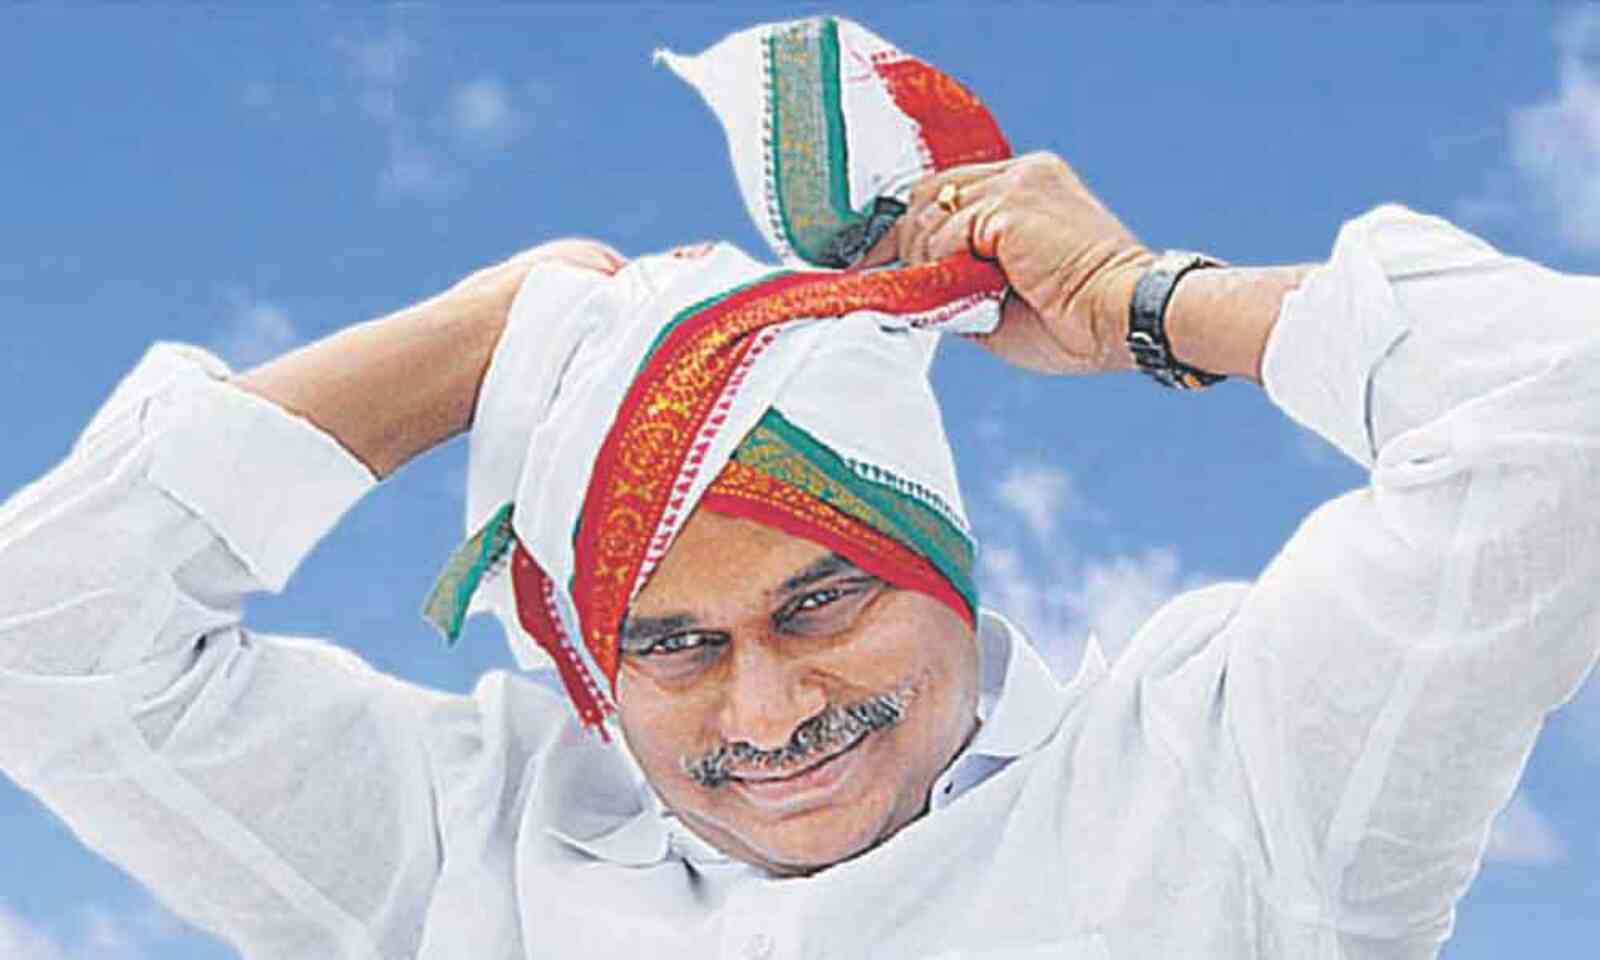 YS Rajasekhara Reddy: A tough but value-based politician